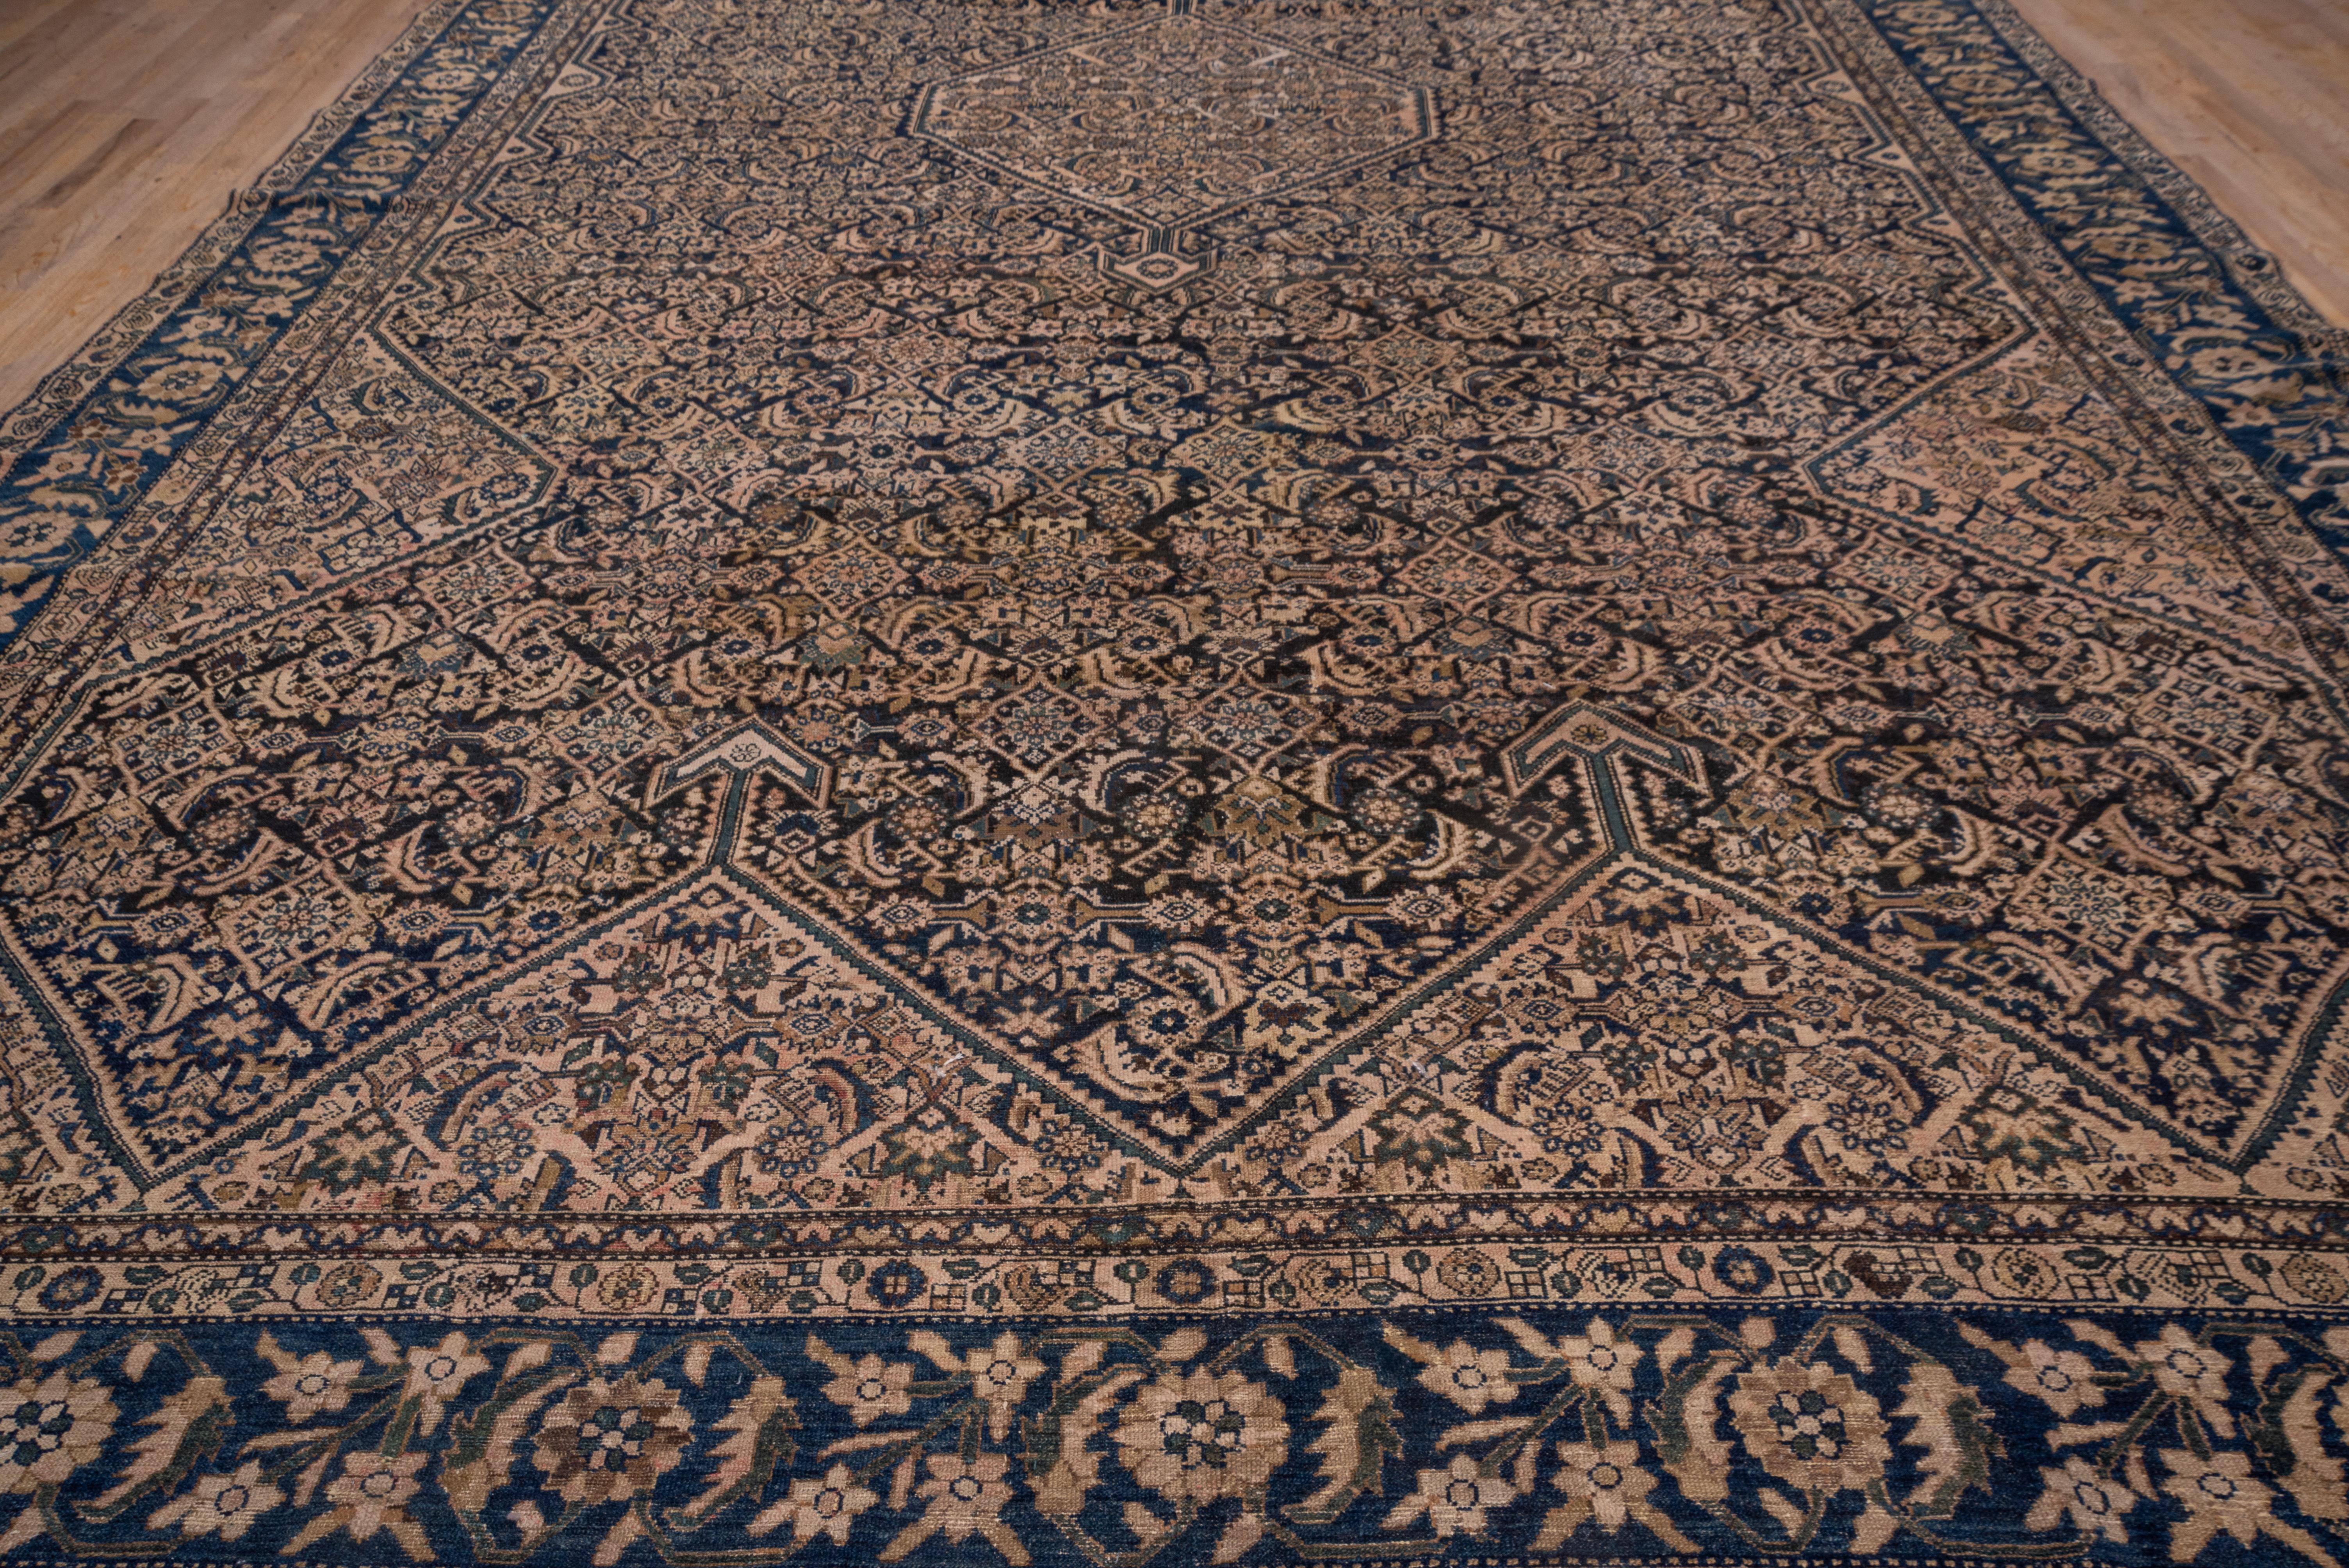 This west Persian village carpet is all Herati: in the pendanted, ivory hexagonal medallion, the end and side cream sections, and in the dark blue shaped sub field. The dark blue border presents a version of the tangerine flower repeat with